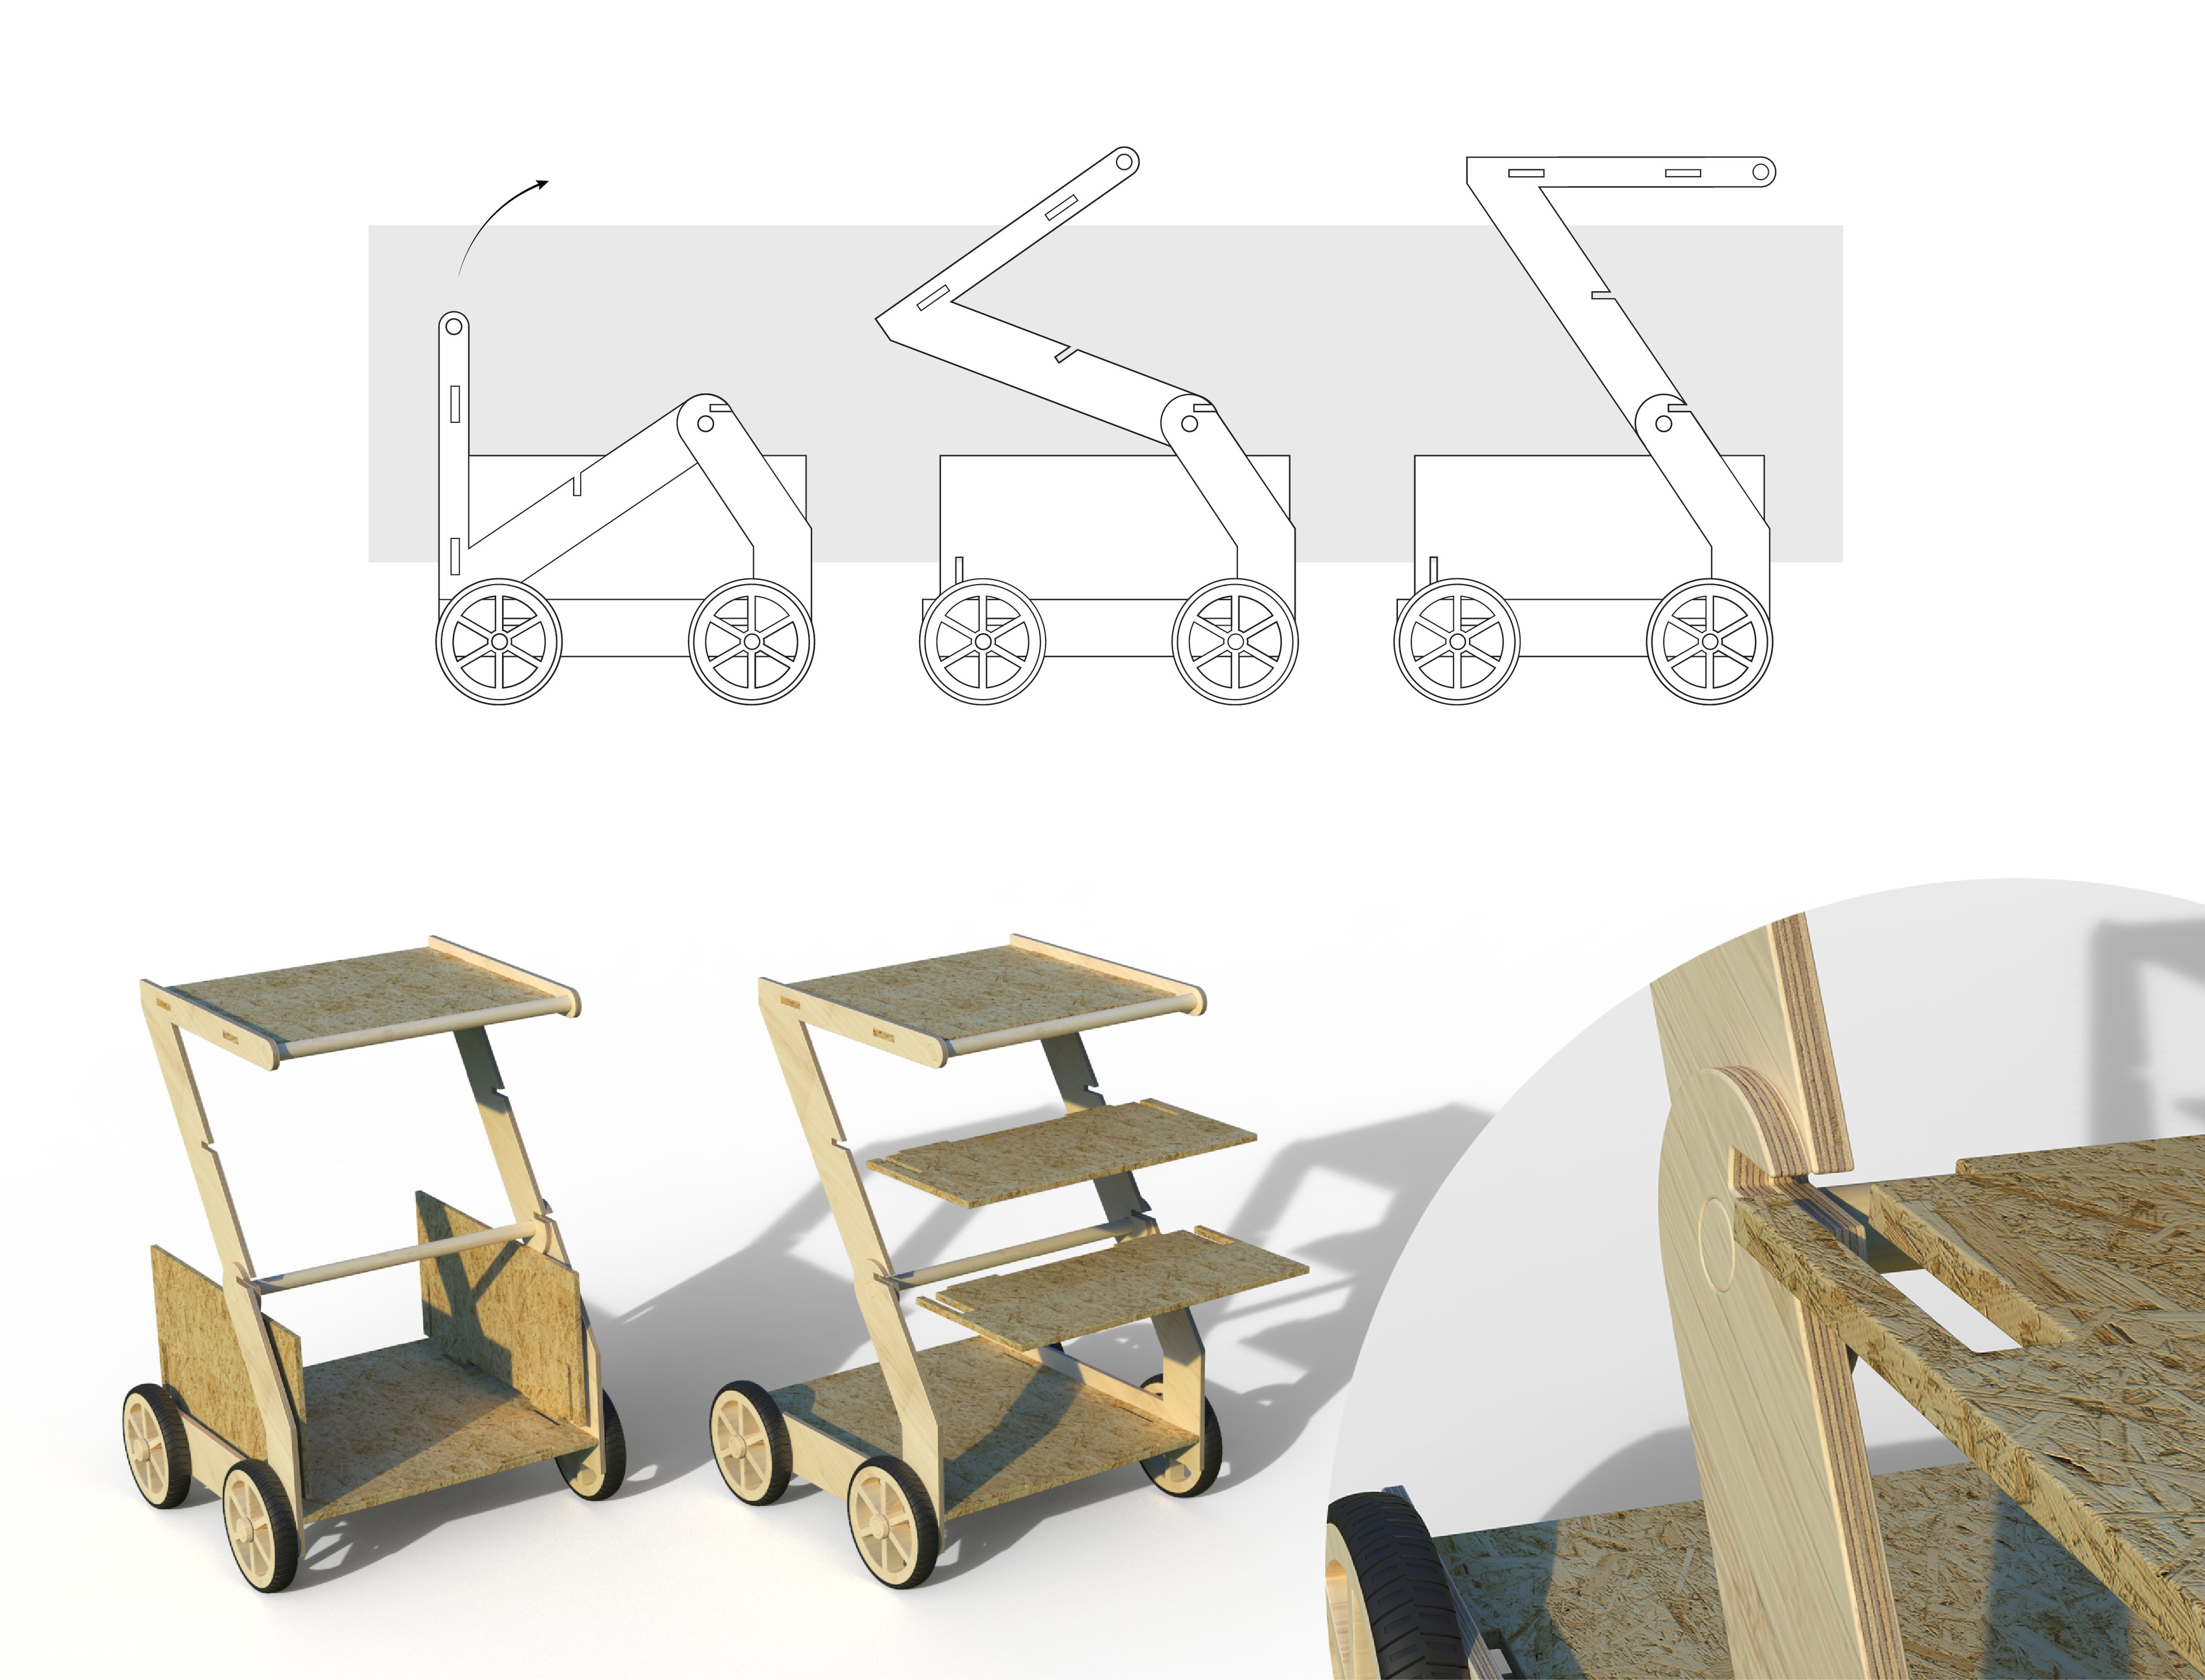 dZ - Transformable Trolley & Stand for an Ecovillage by Kerem İnak - Creative Work - $i